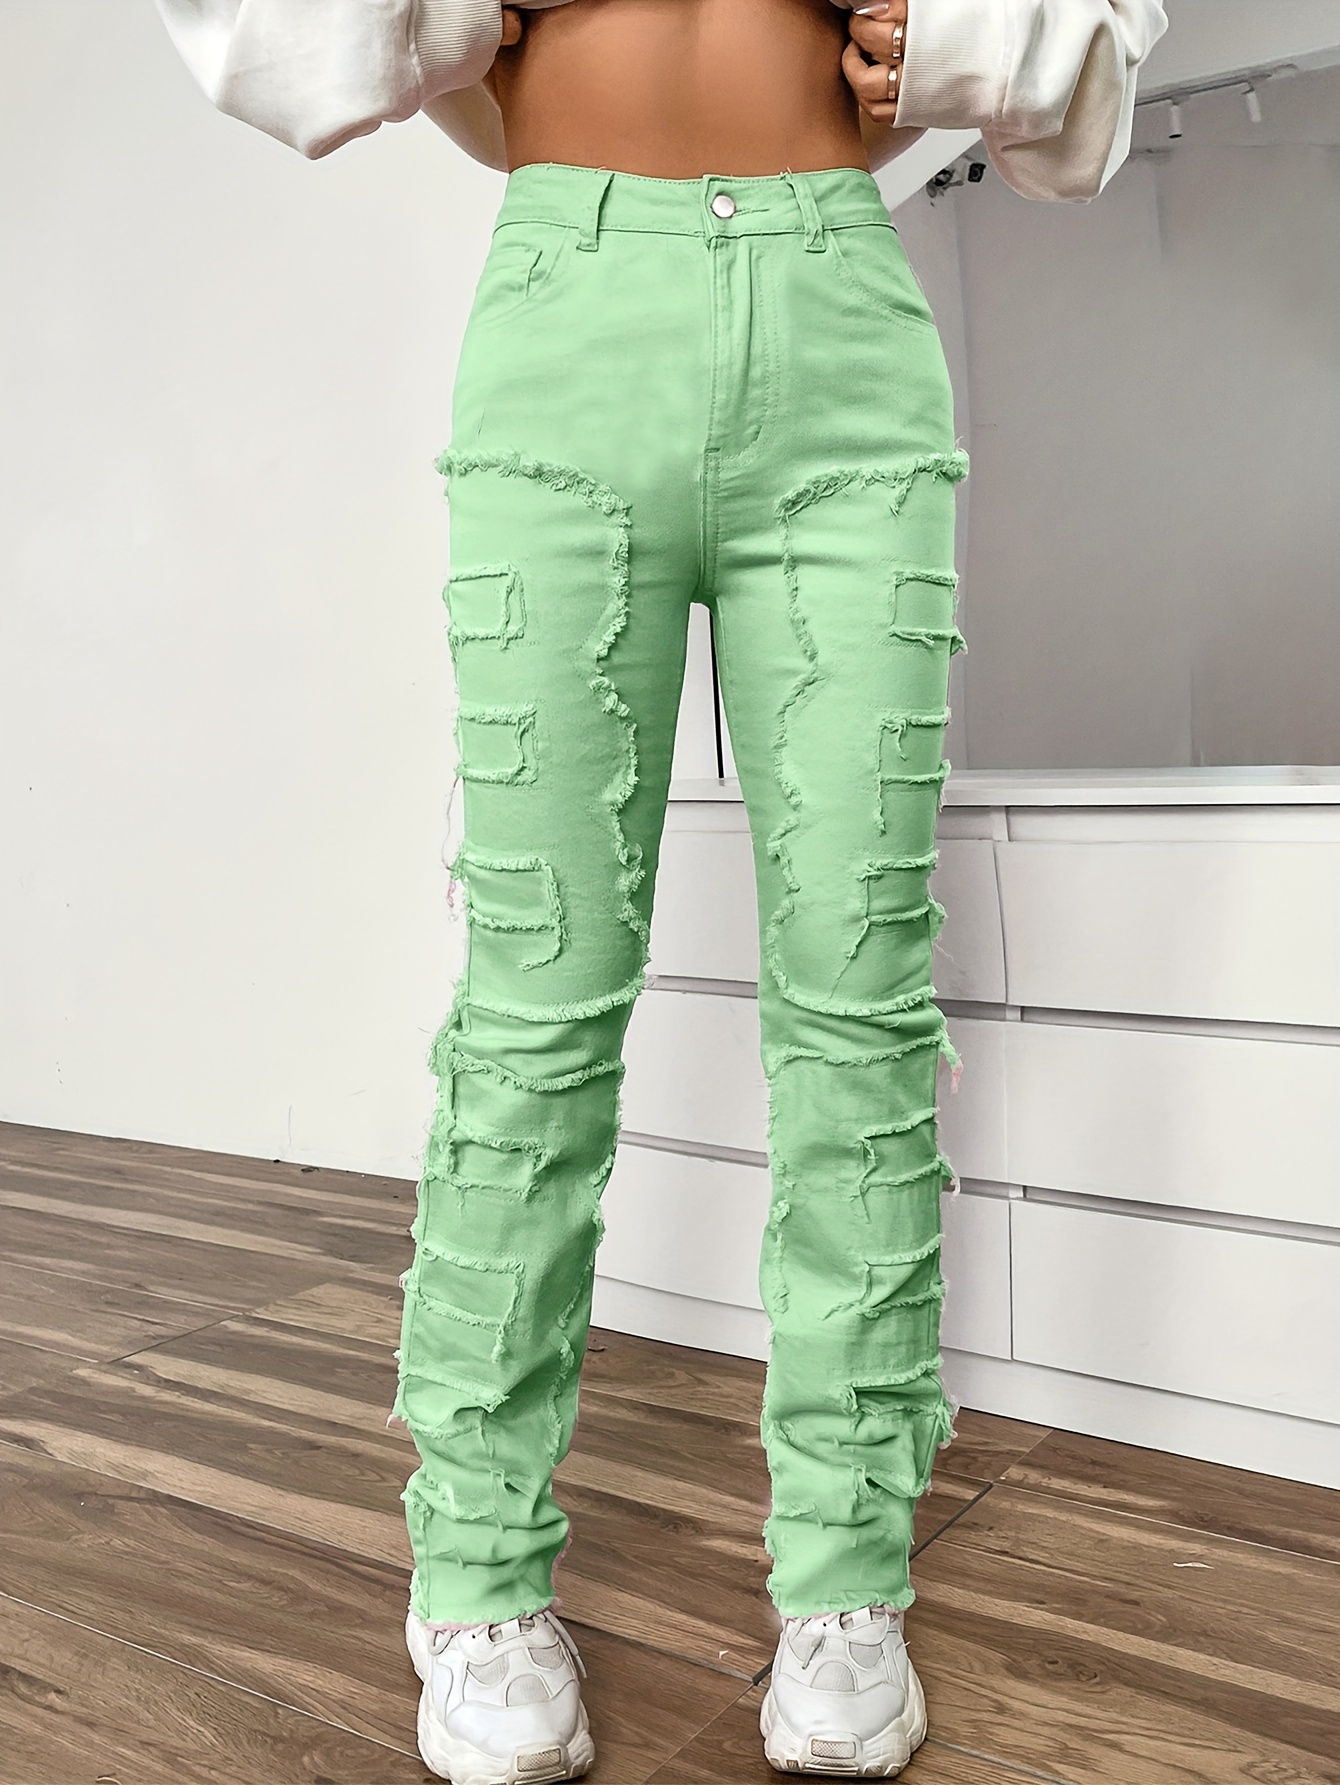 RQYYD Women's High Waisted Stretchy Patchwork Denim Pants Washed Skinny  Jeans Straight Leg Stretch Pants Trendy Streetwear Green L